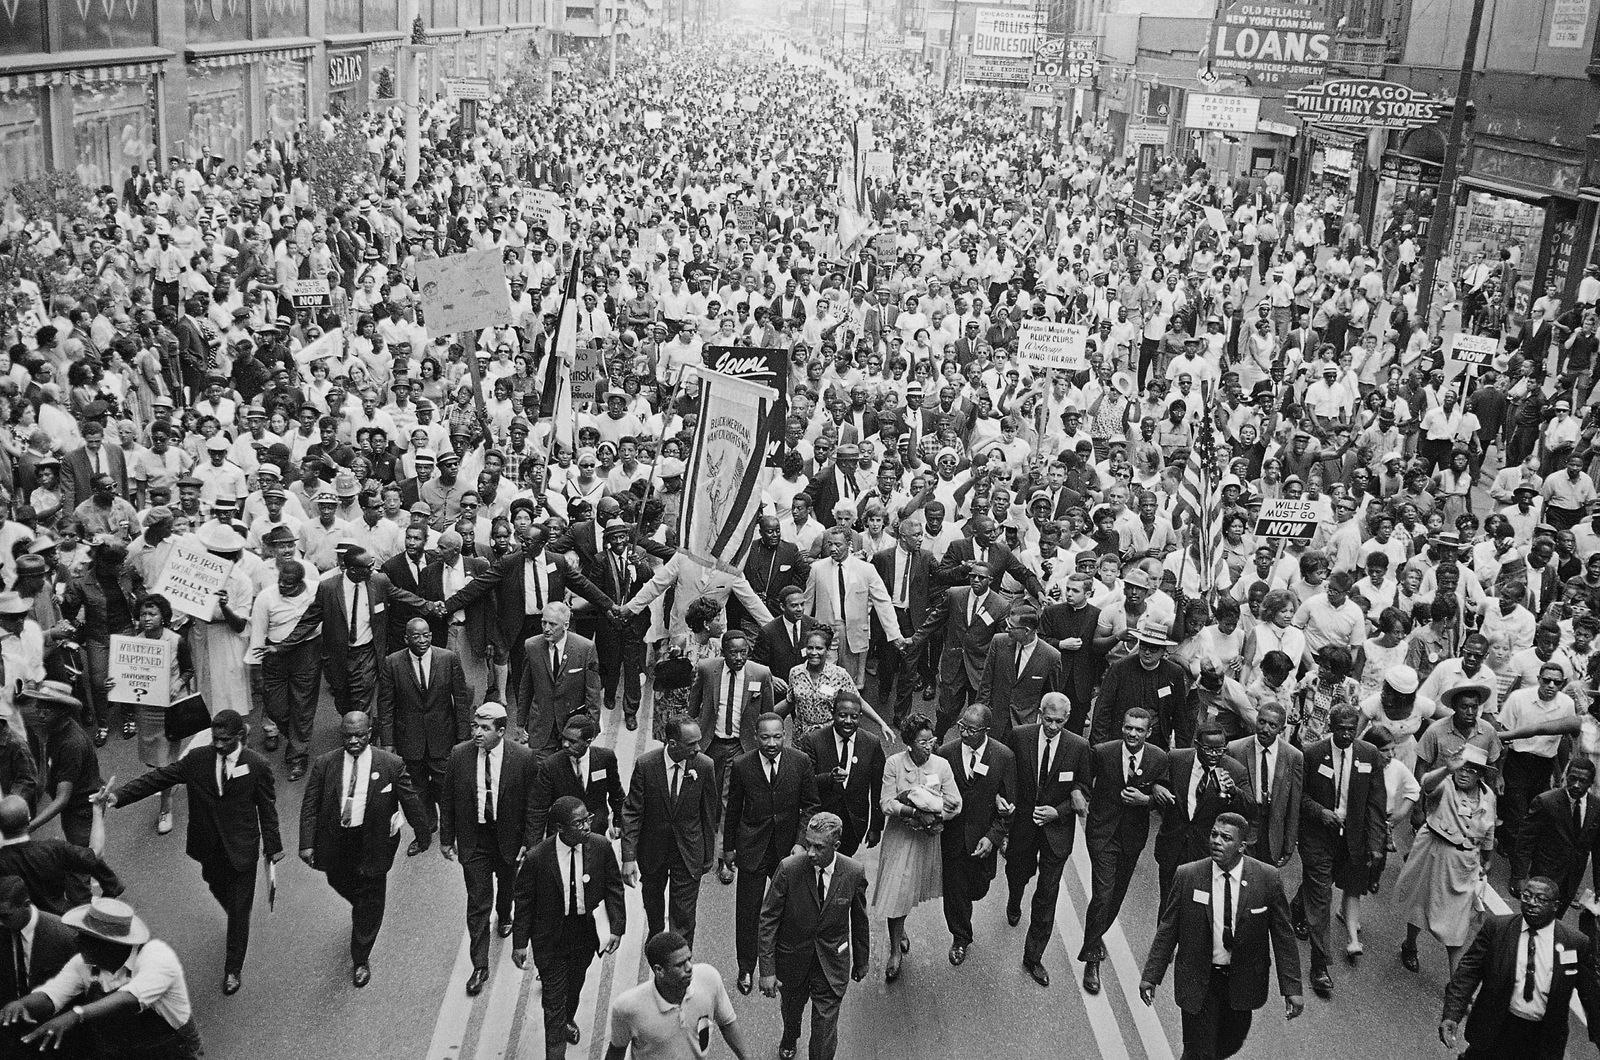 Rev. Martin Luther King Jr., center foreground, walks in vanguard of crowd estimated at more than 10,000 persons who gathered in downtown Chicago, July 26, 1965 to protest segregation in the city's schools. (AP Photo)